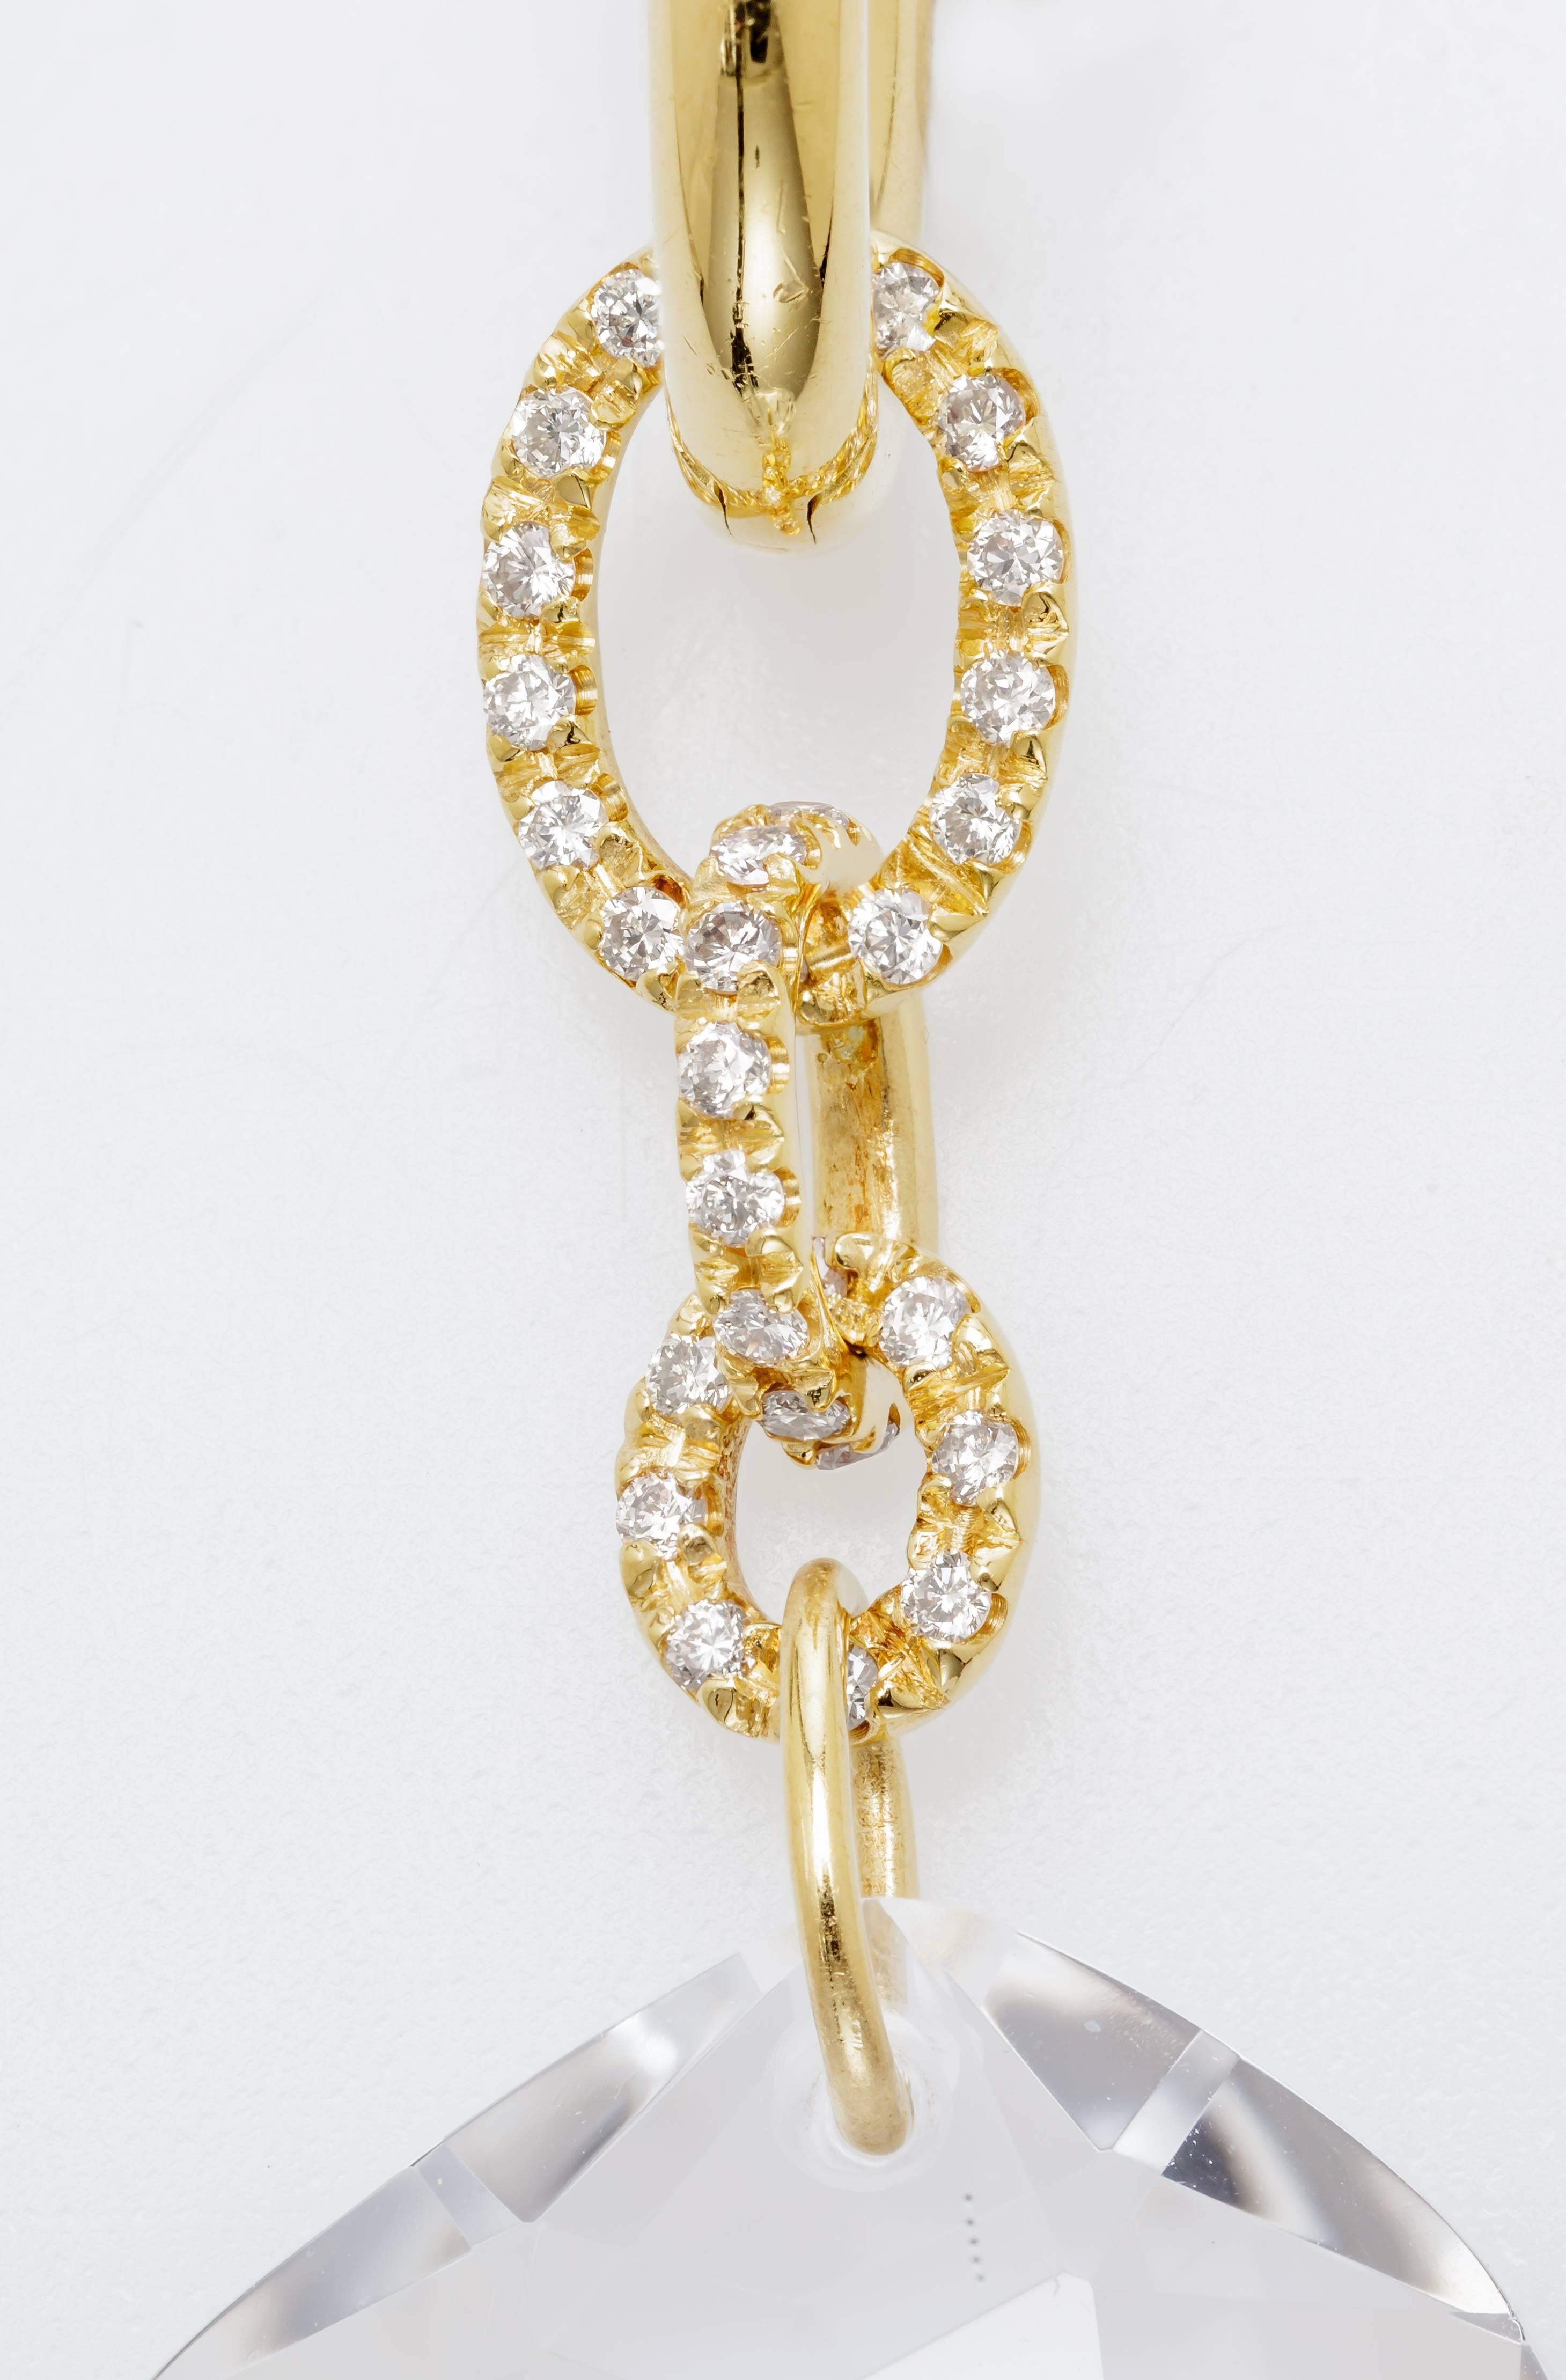 H. Stern 0.79 Carat Diamonds 100.35 Carat Quartz Gold DVF Earrings In New Condition For Sale In Houston, TX